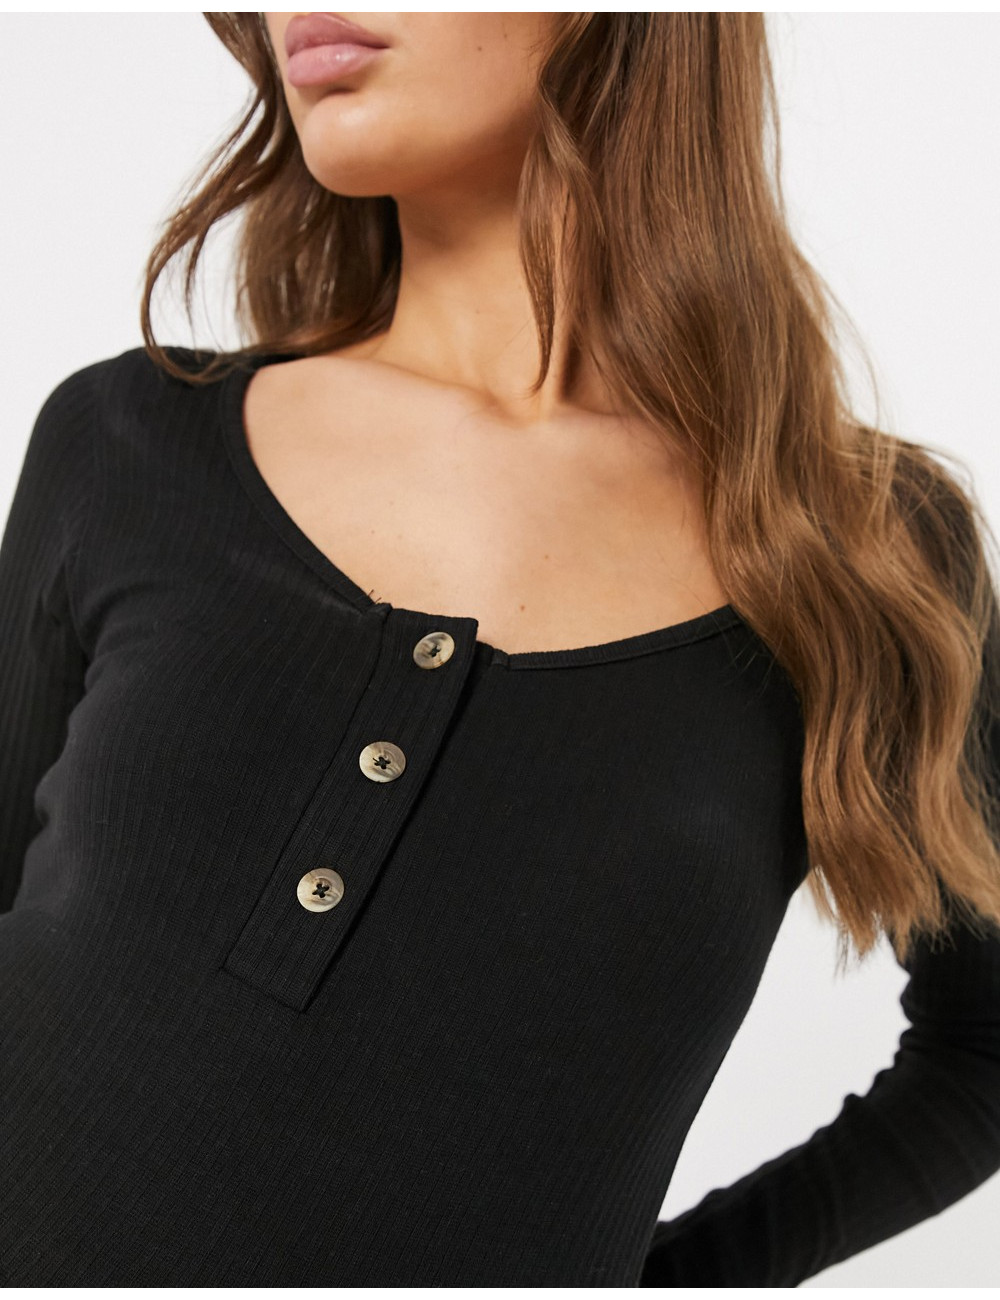 Missguided Maternity button...